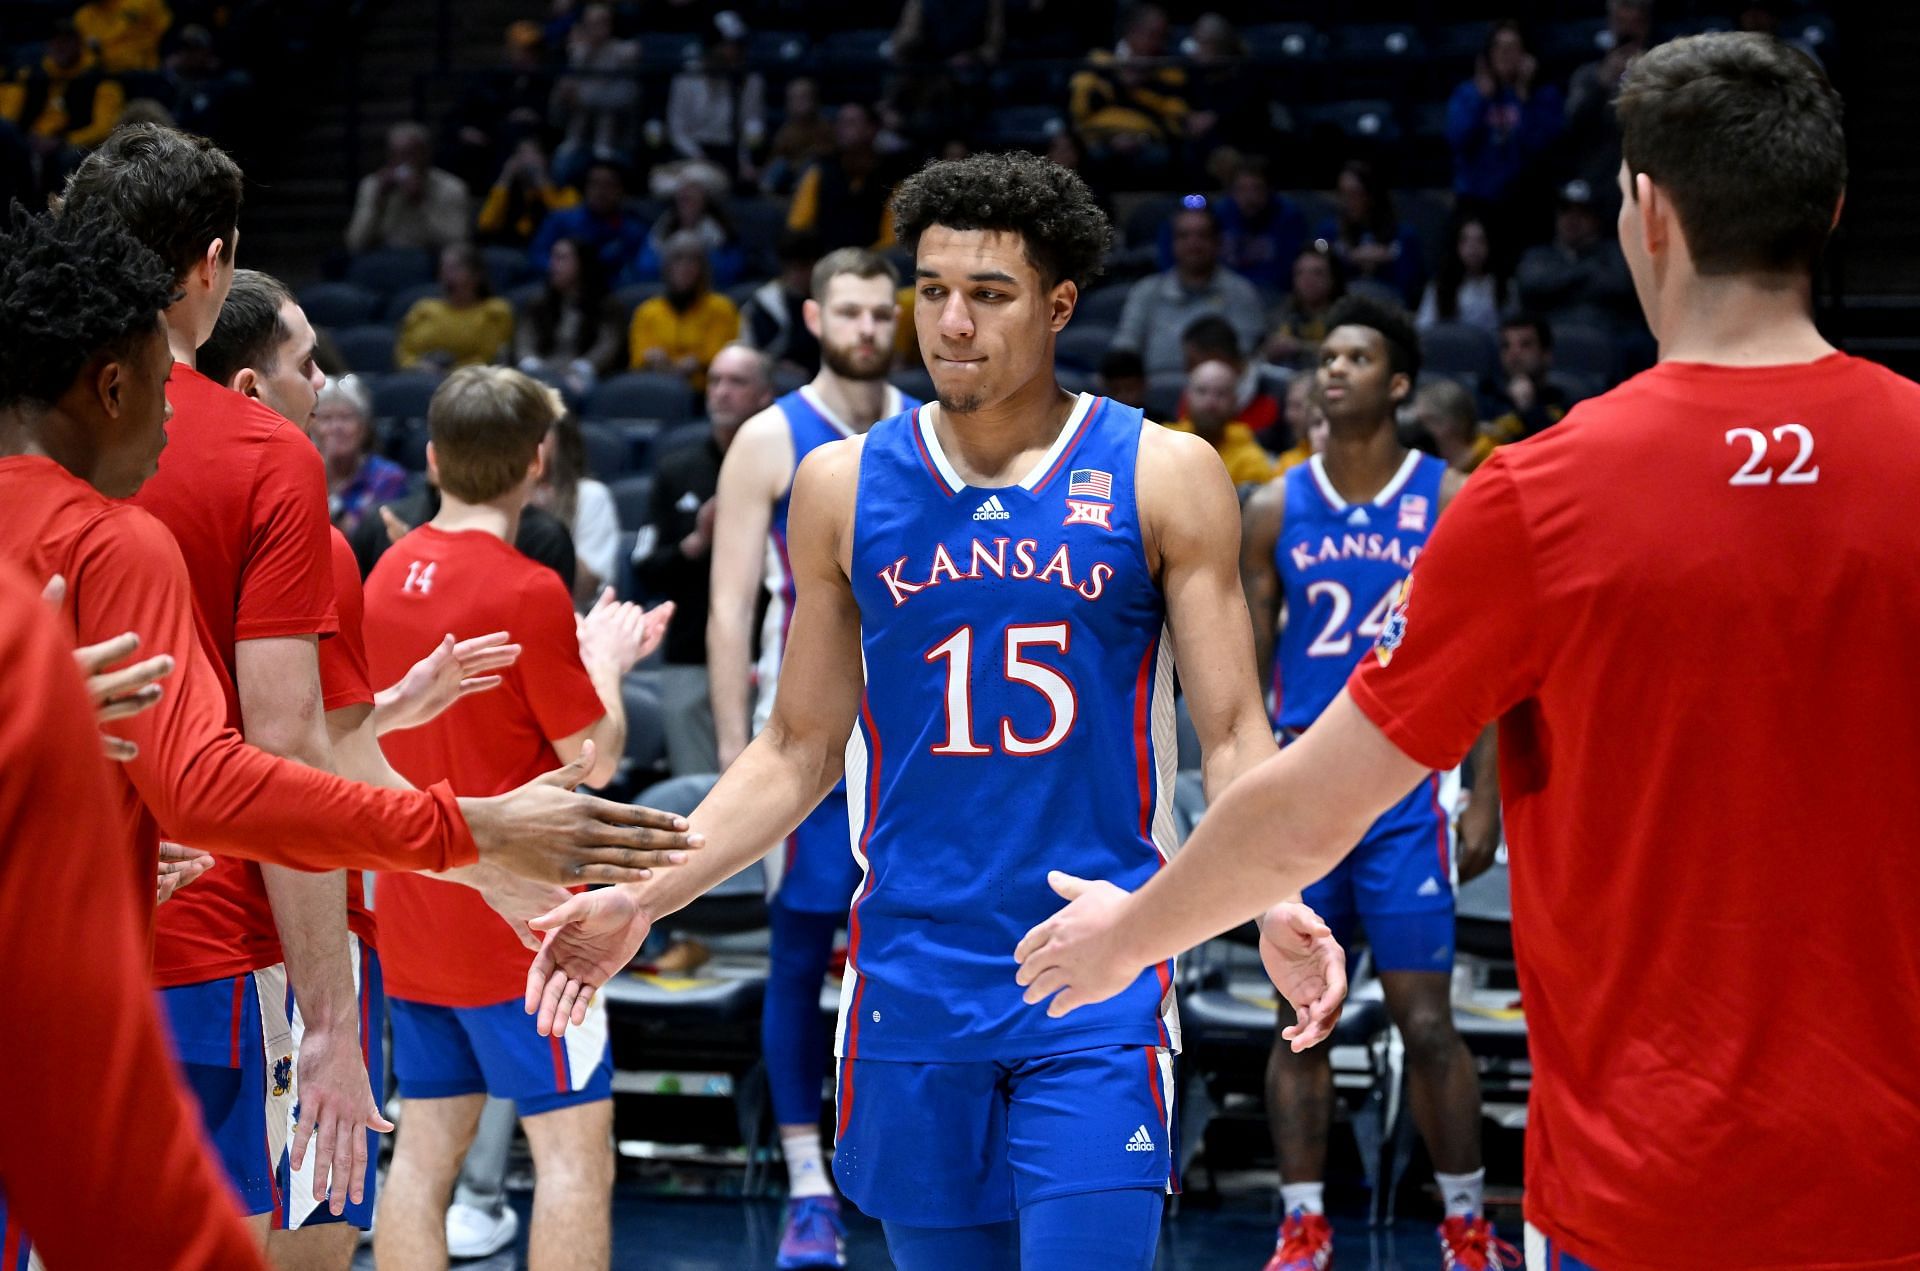 Kansas guard Kevin McCullar is battling knee soreness today against Iowa State.